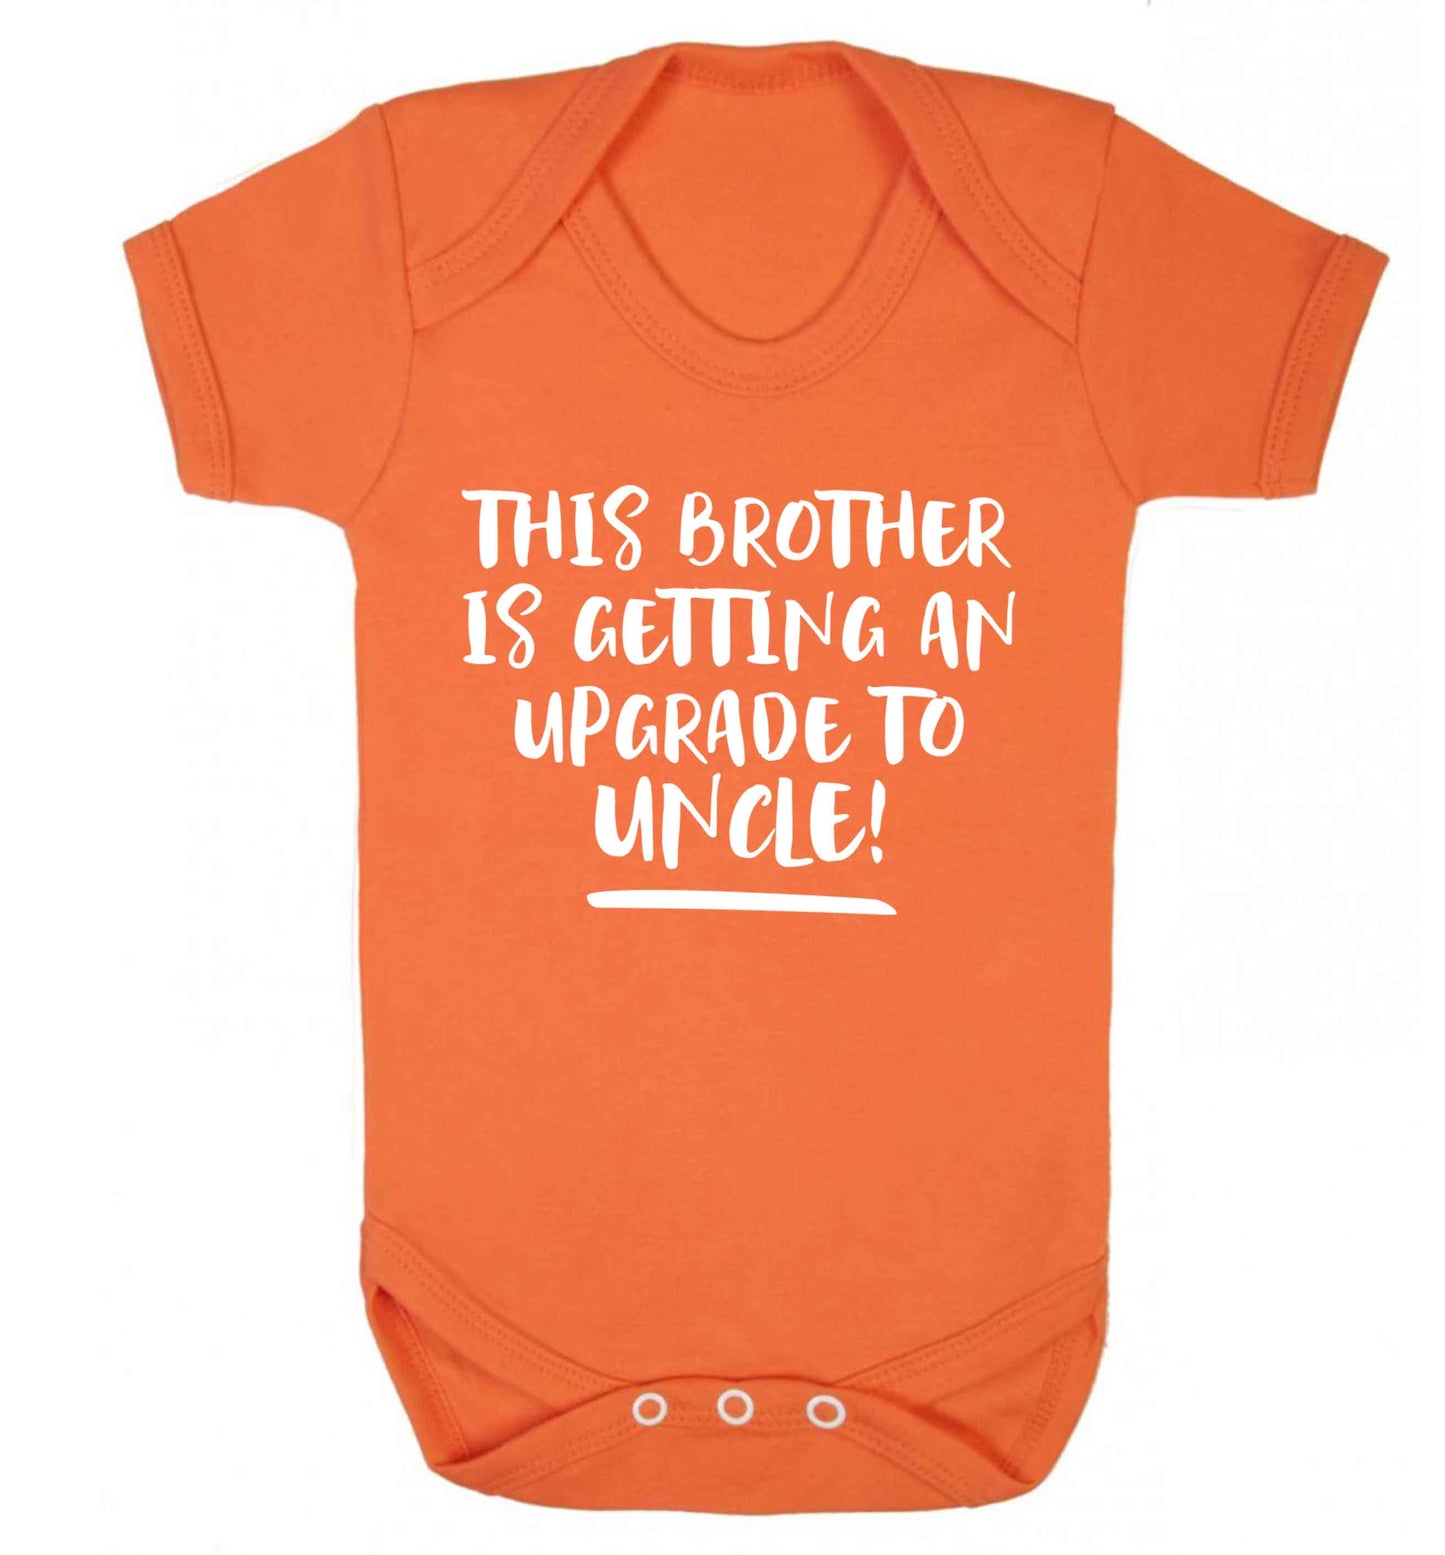 This brother is getting an upgrade to uncle! Baby Vest orange 18-24 months